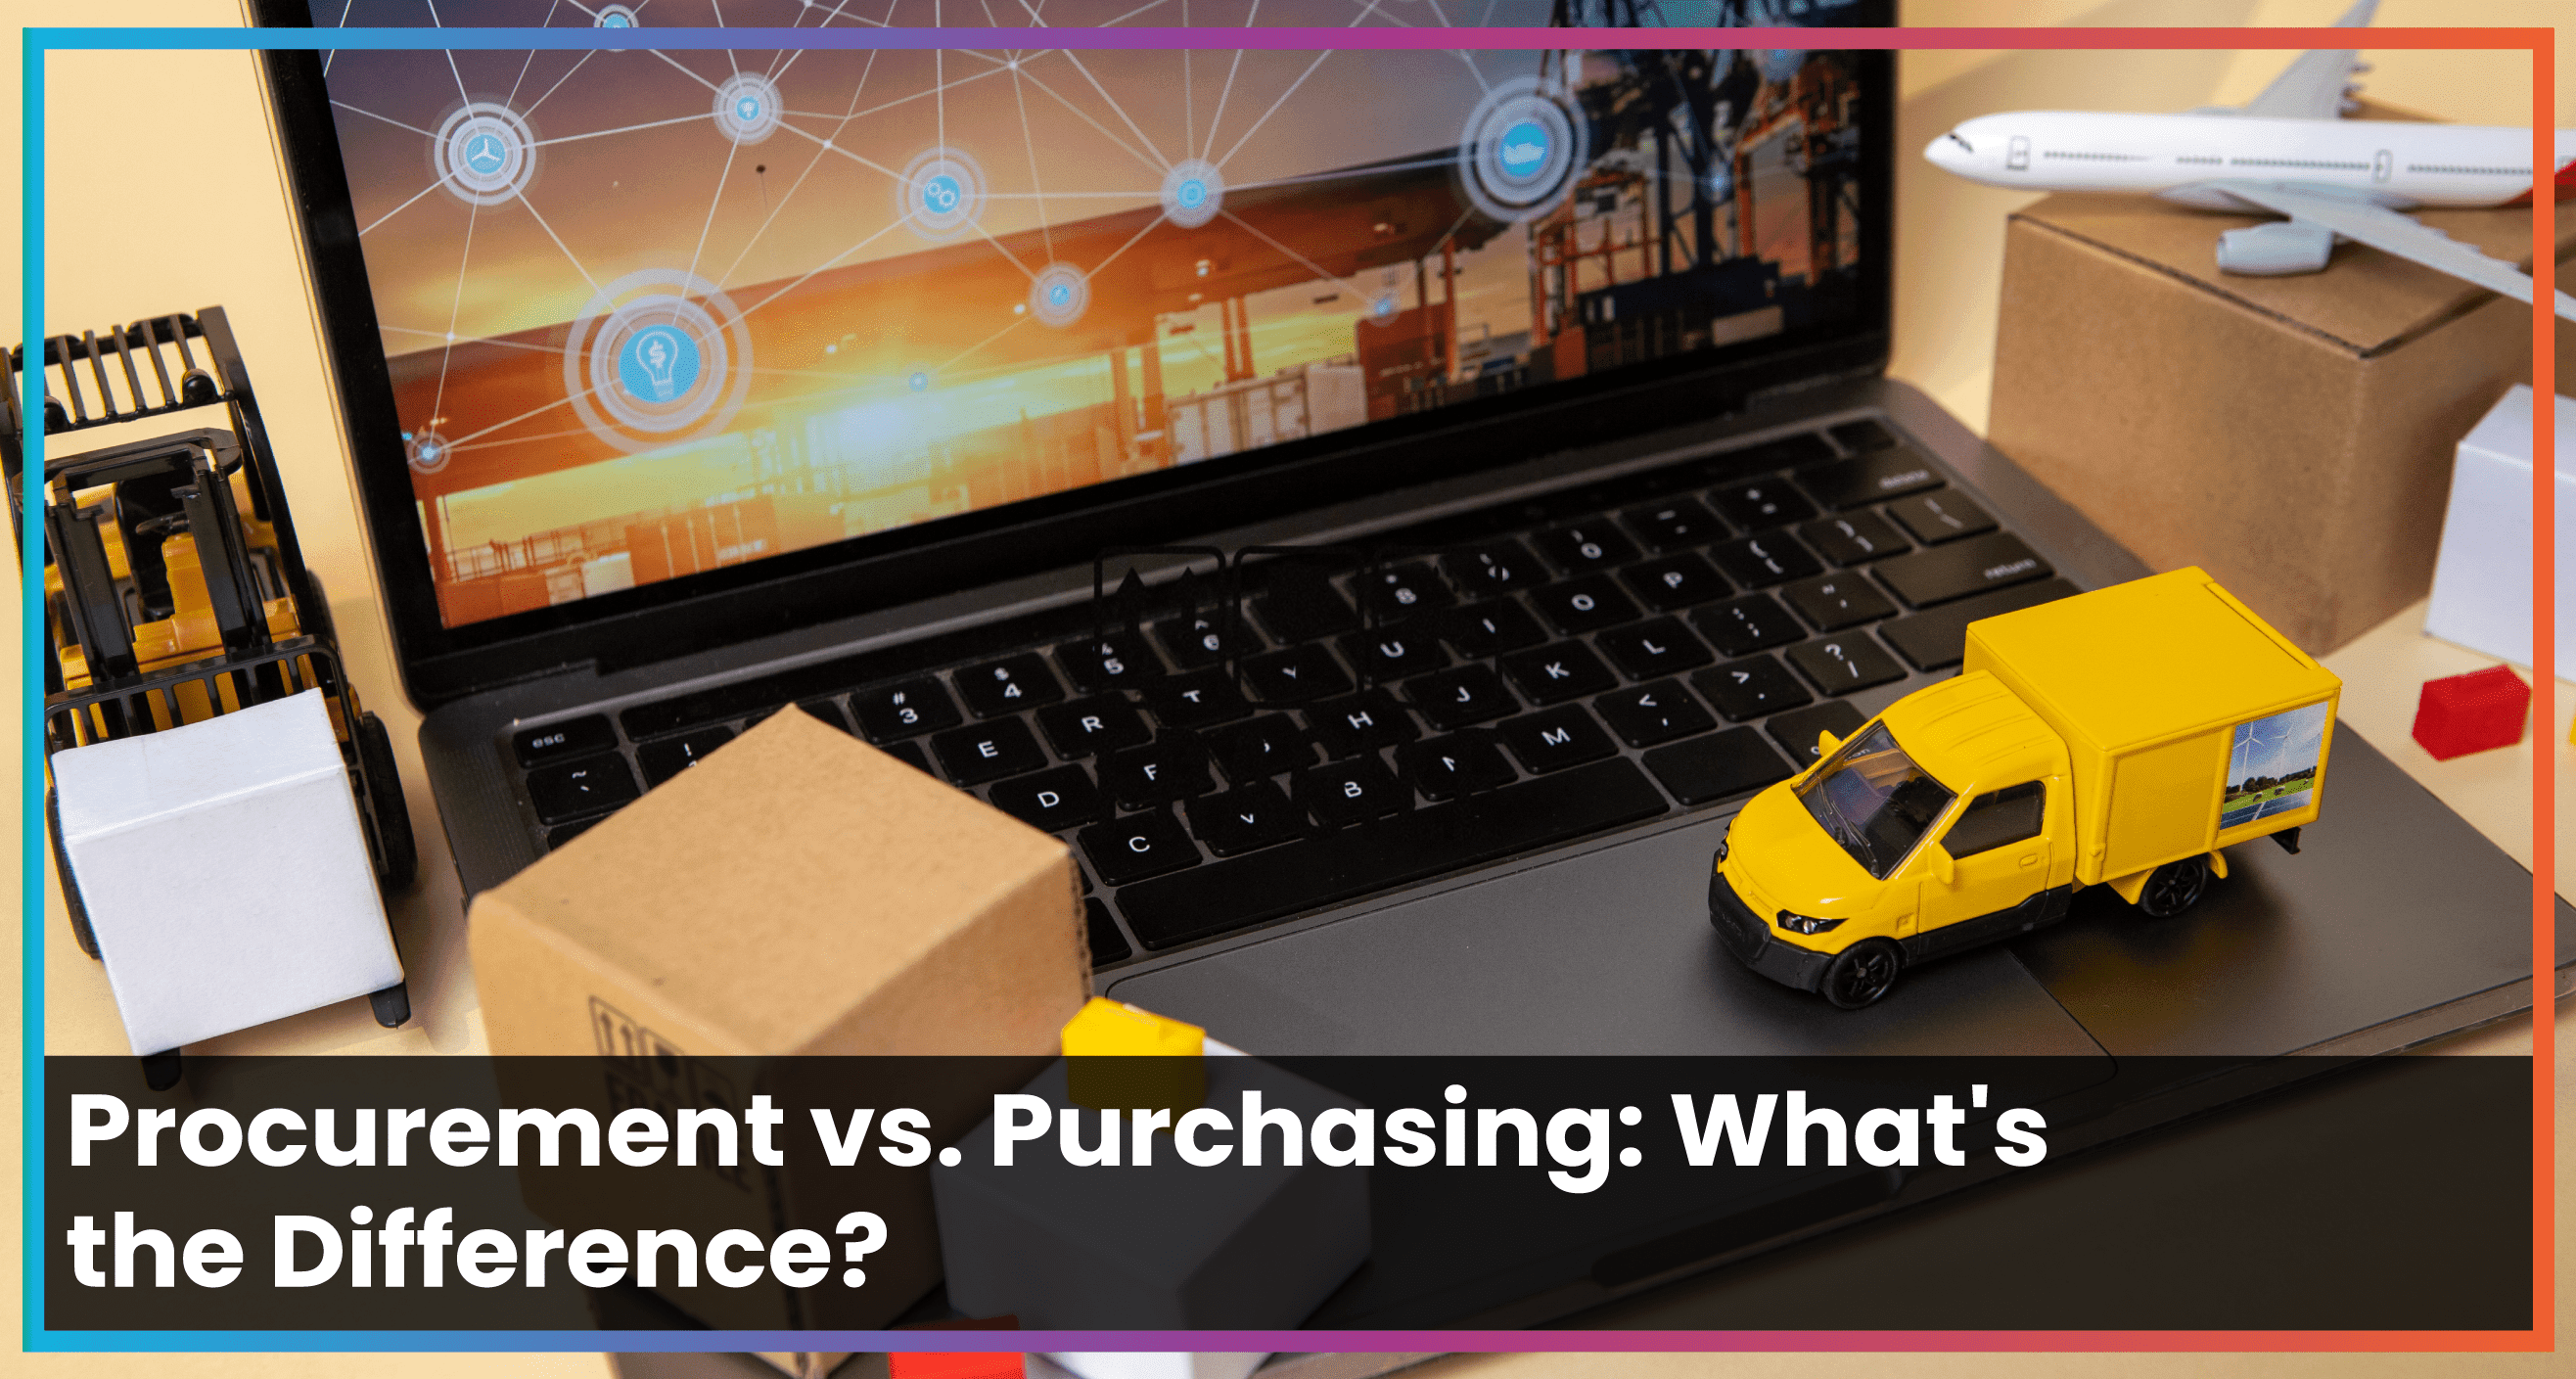 Procurement vs. Purchasing: What's the Difference?